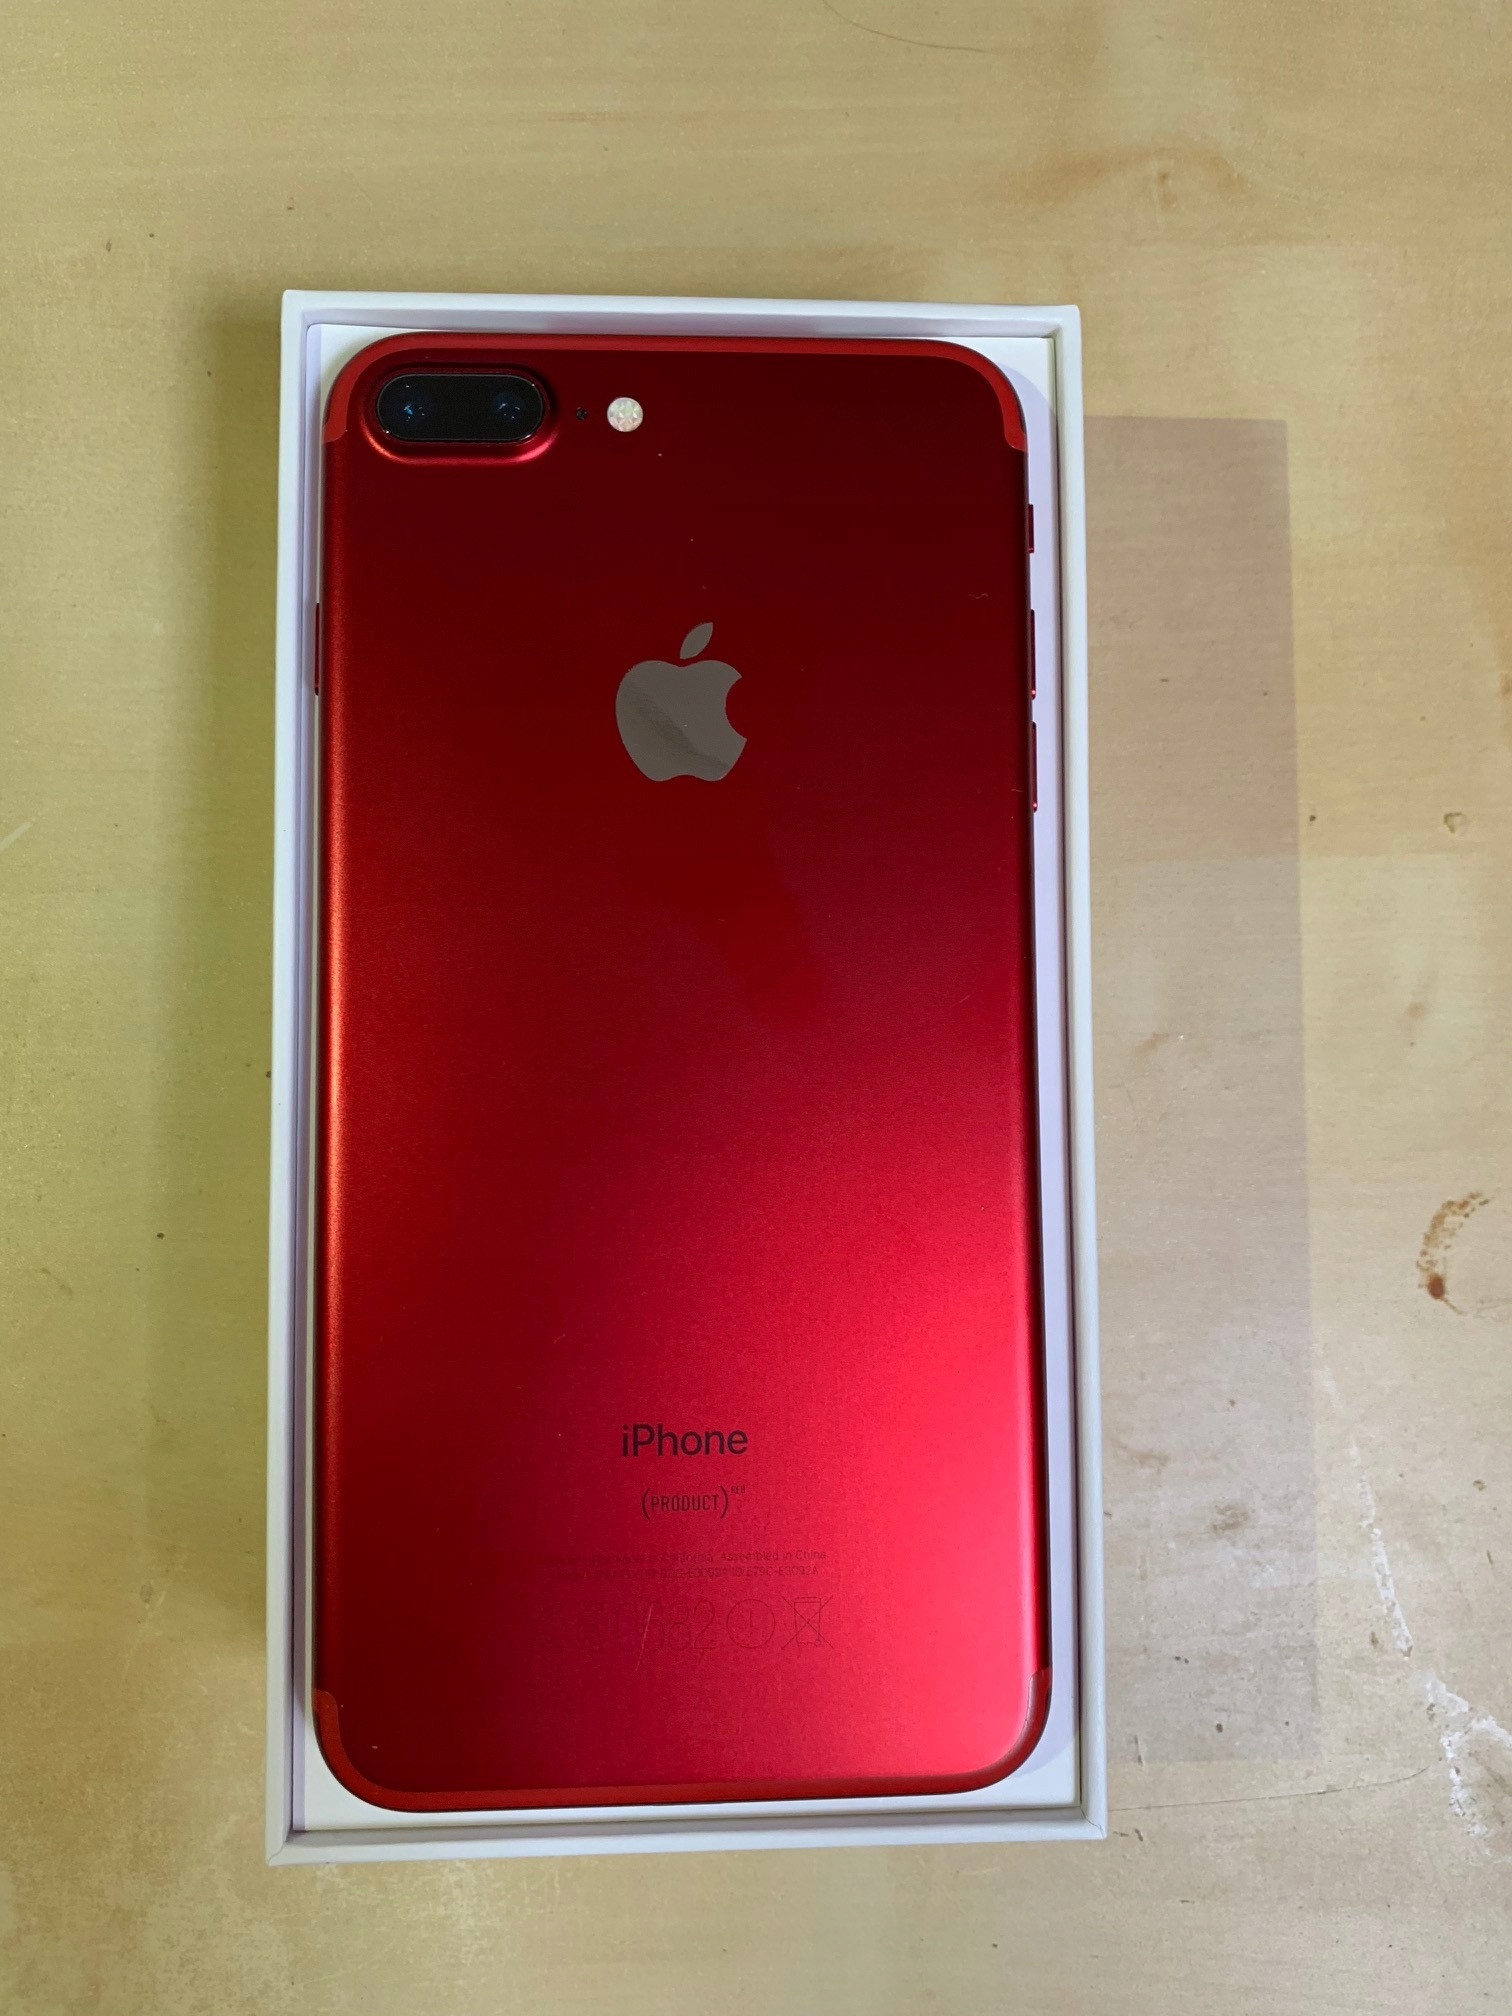 Apple - iPhone7 128GB product RED〜SIMロック解除済みの+